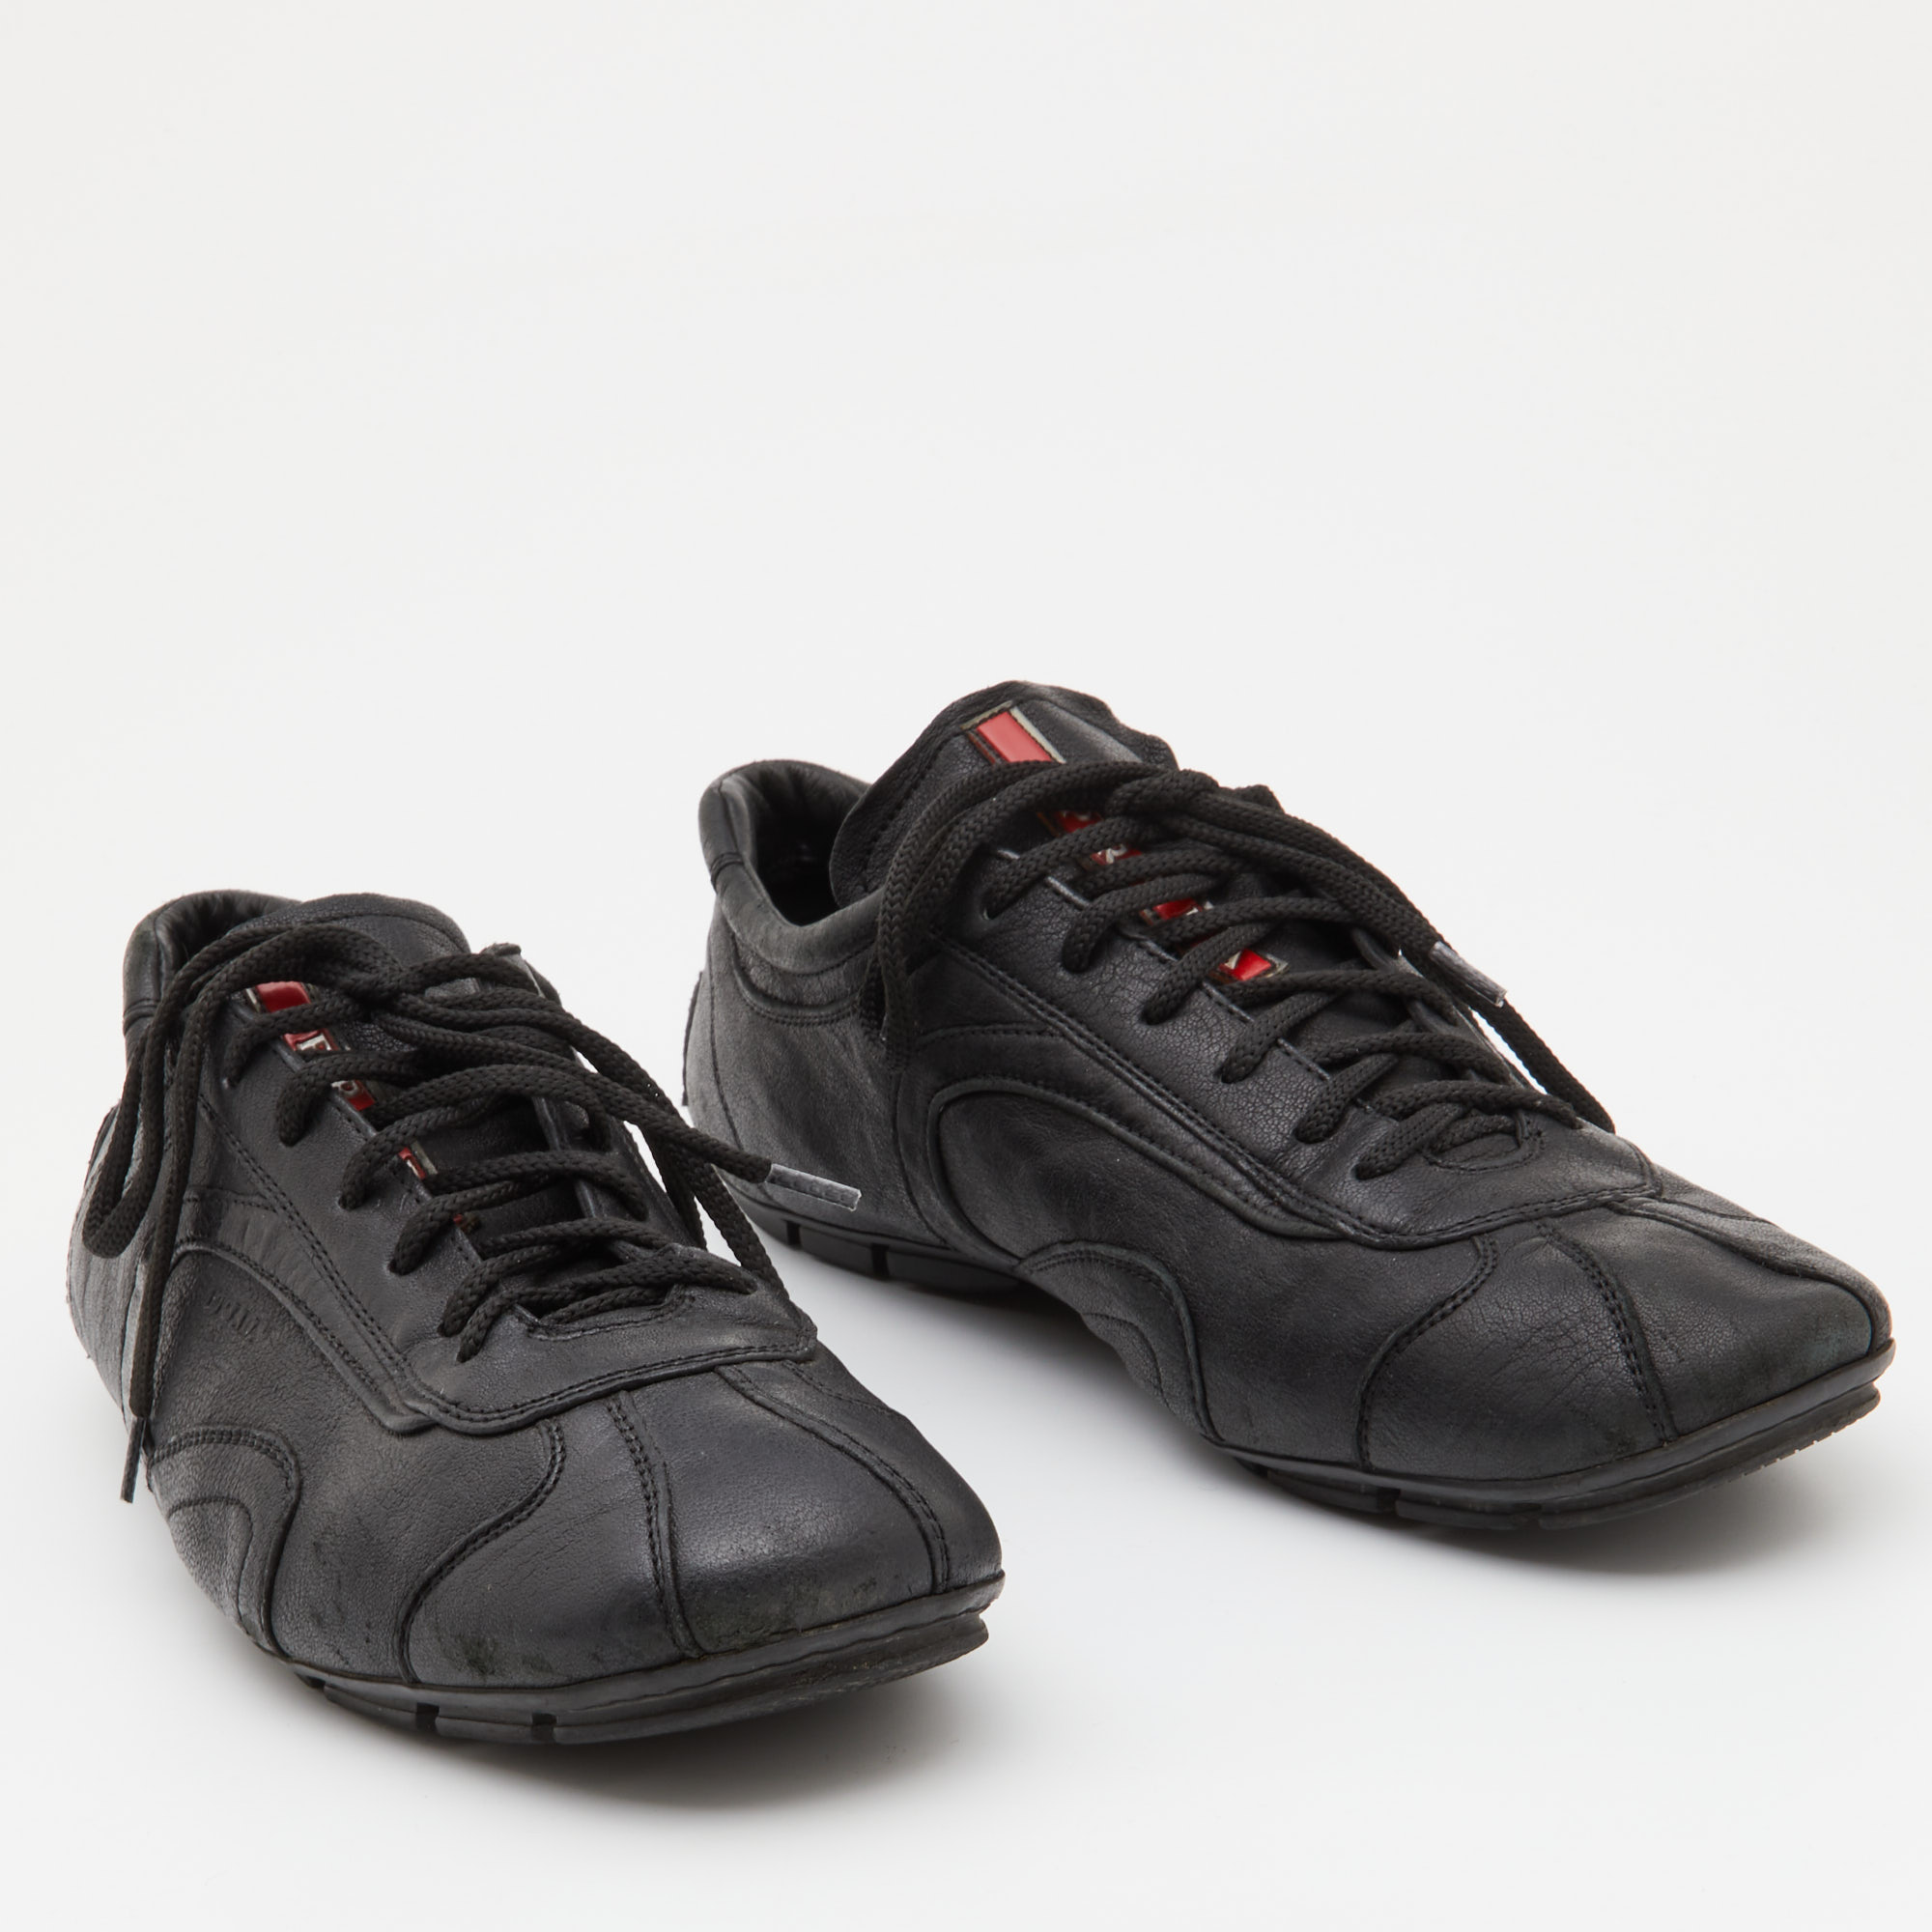 Prada Sports Black Leather Low Top Sneakers Size 43